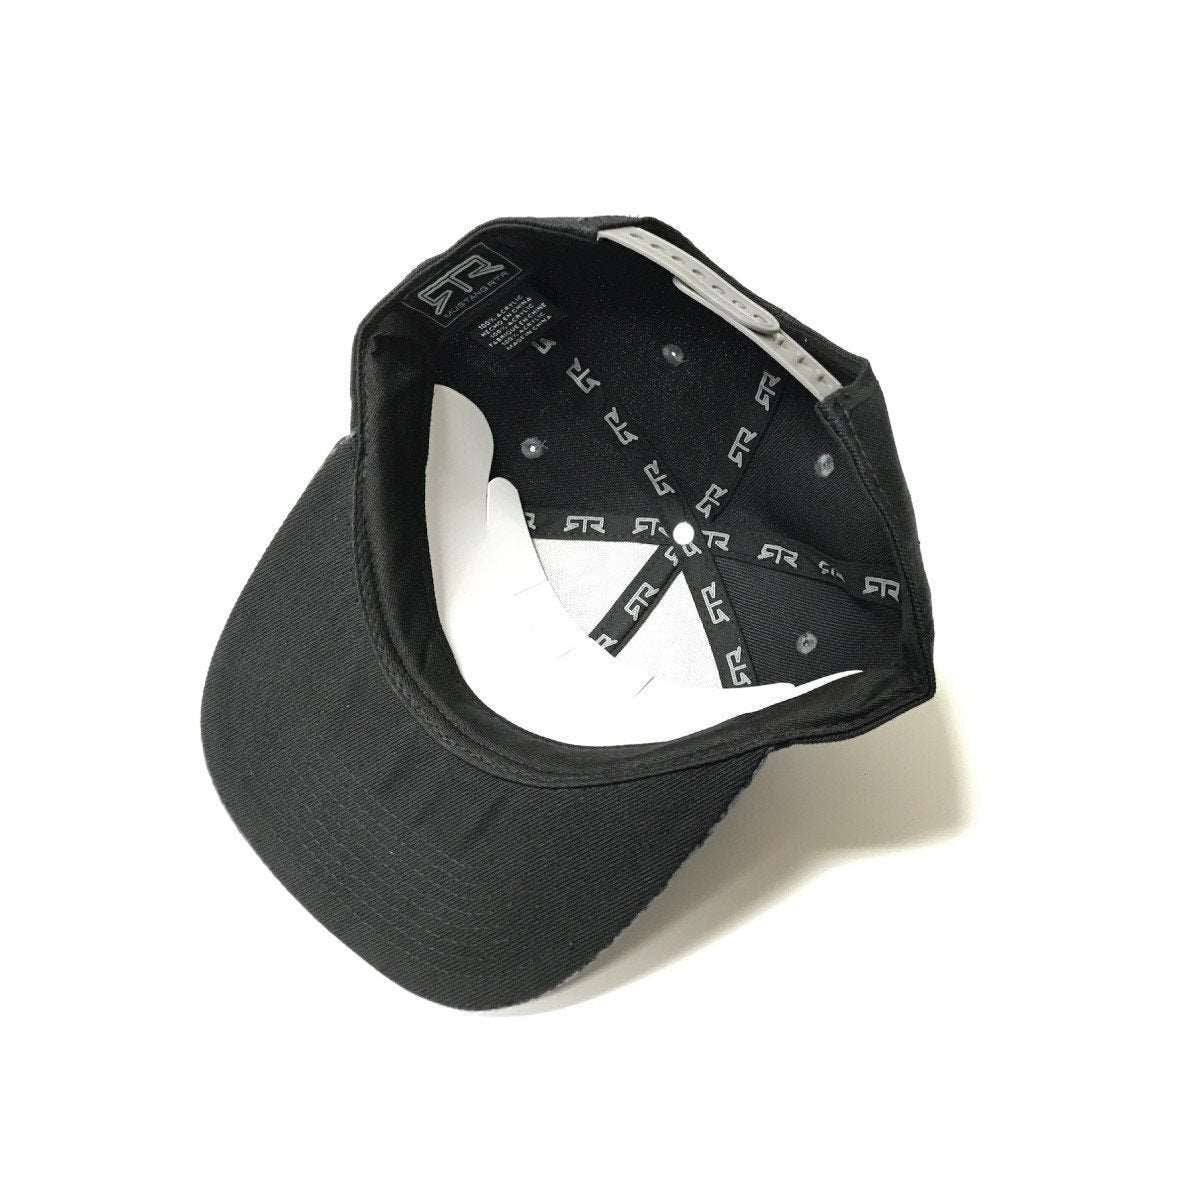 RTR Grey And Black Snap Back Hat